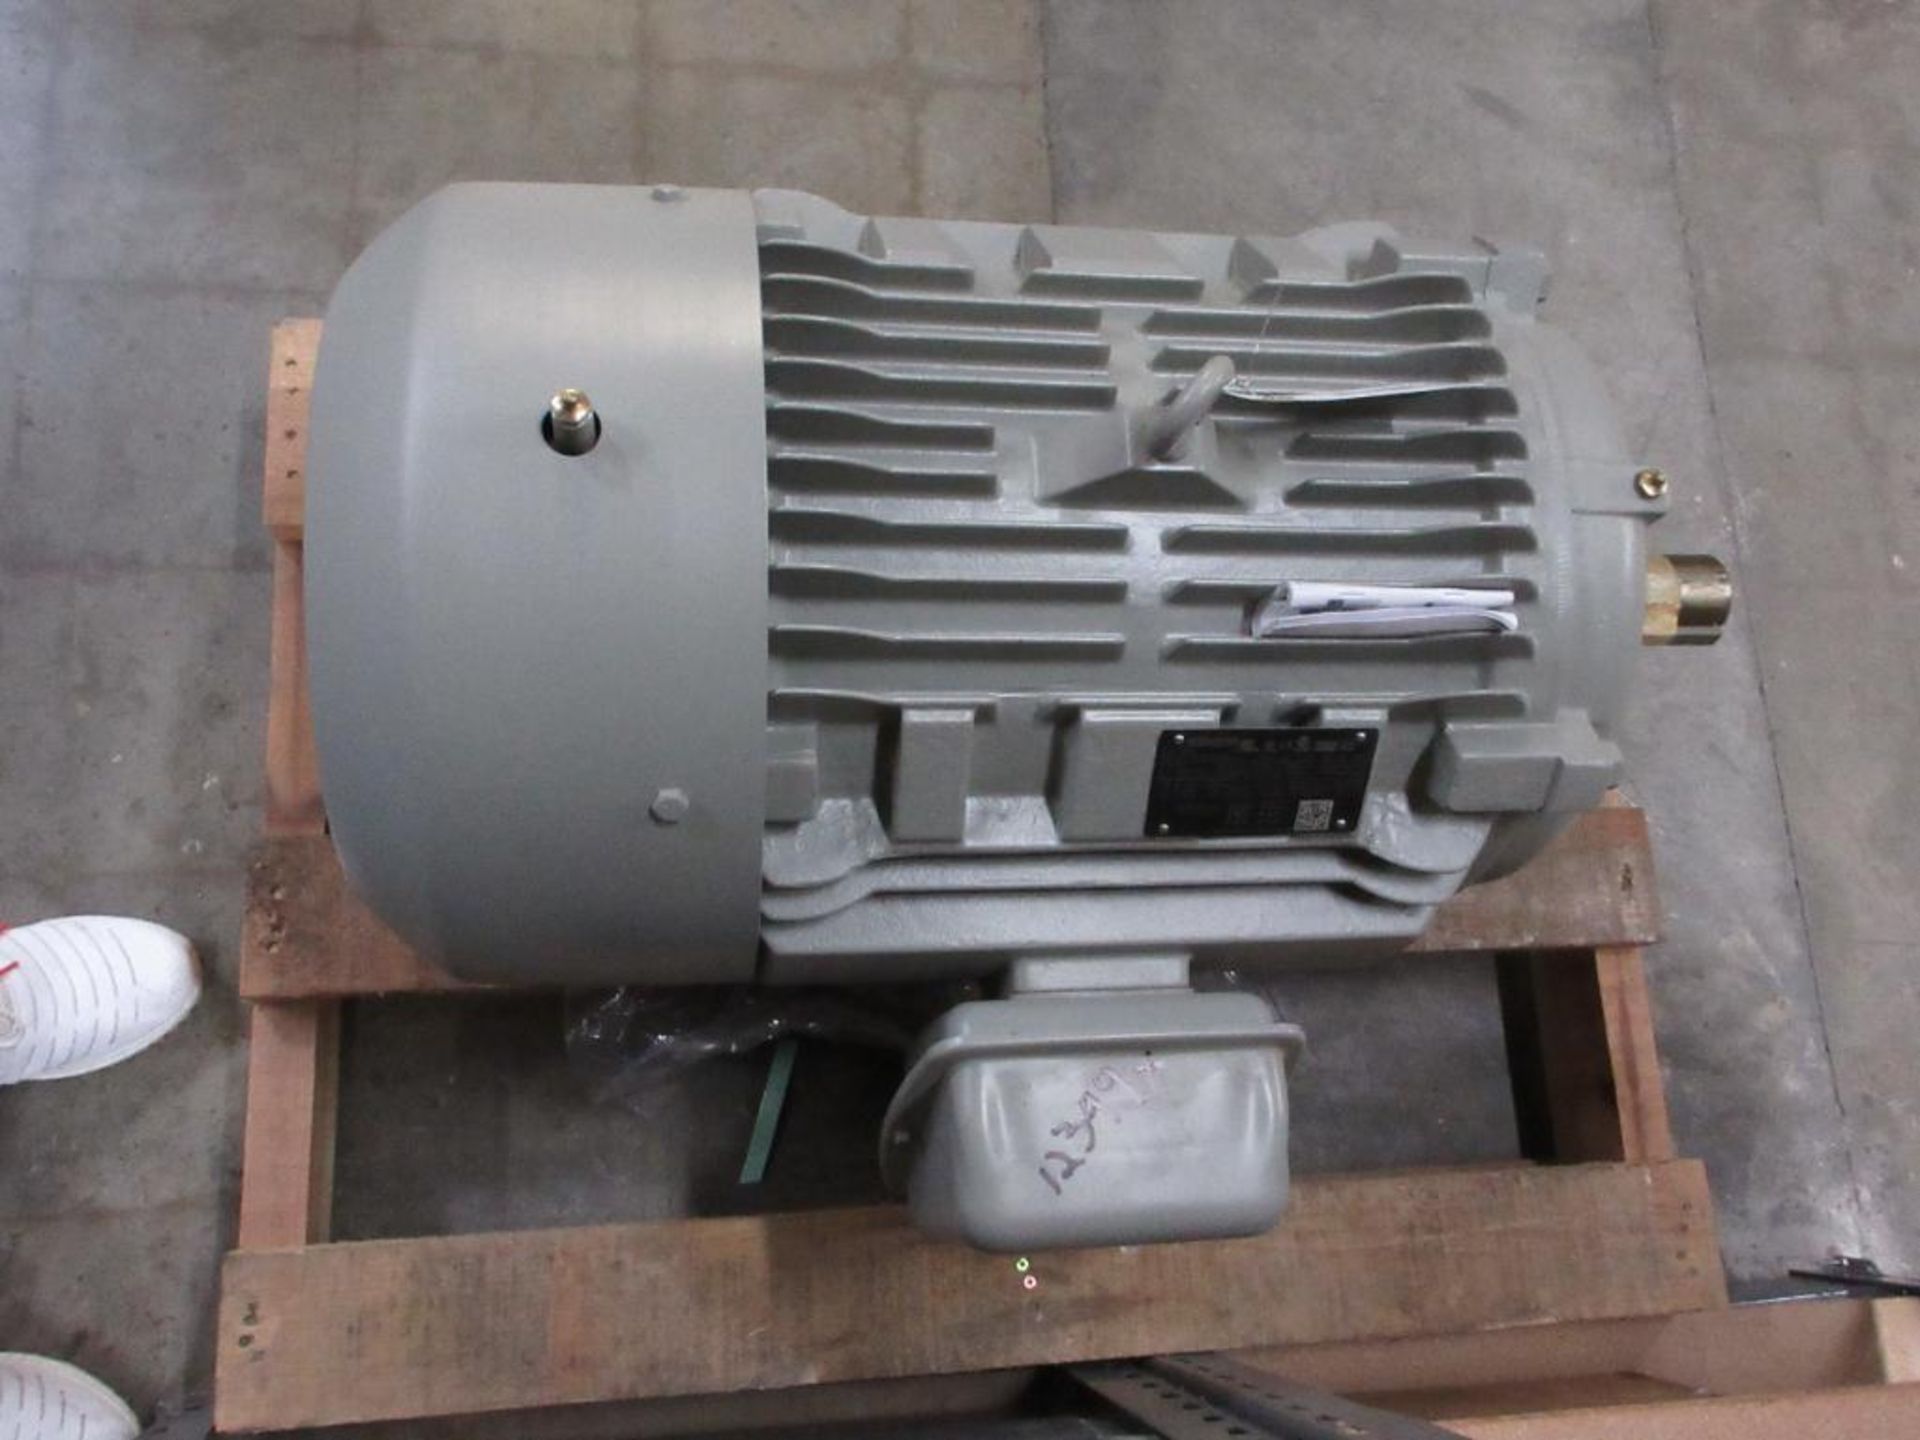 SIEMENS MOTOR 40HP 3 PHASE 1800RPM FRAME 324T P/N 1LE22213AB116AA3 TYPE GP100 (THIS LOT IS FOB CAMAR - Image 6 of 9